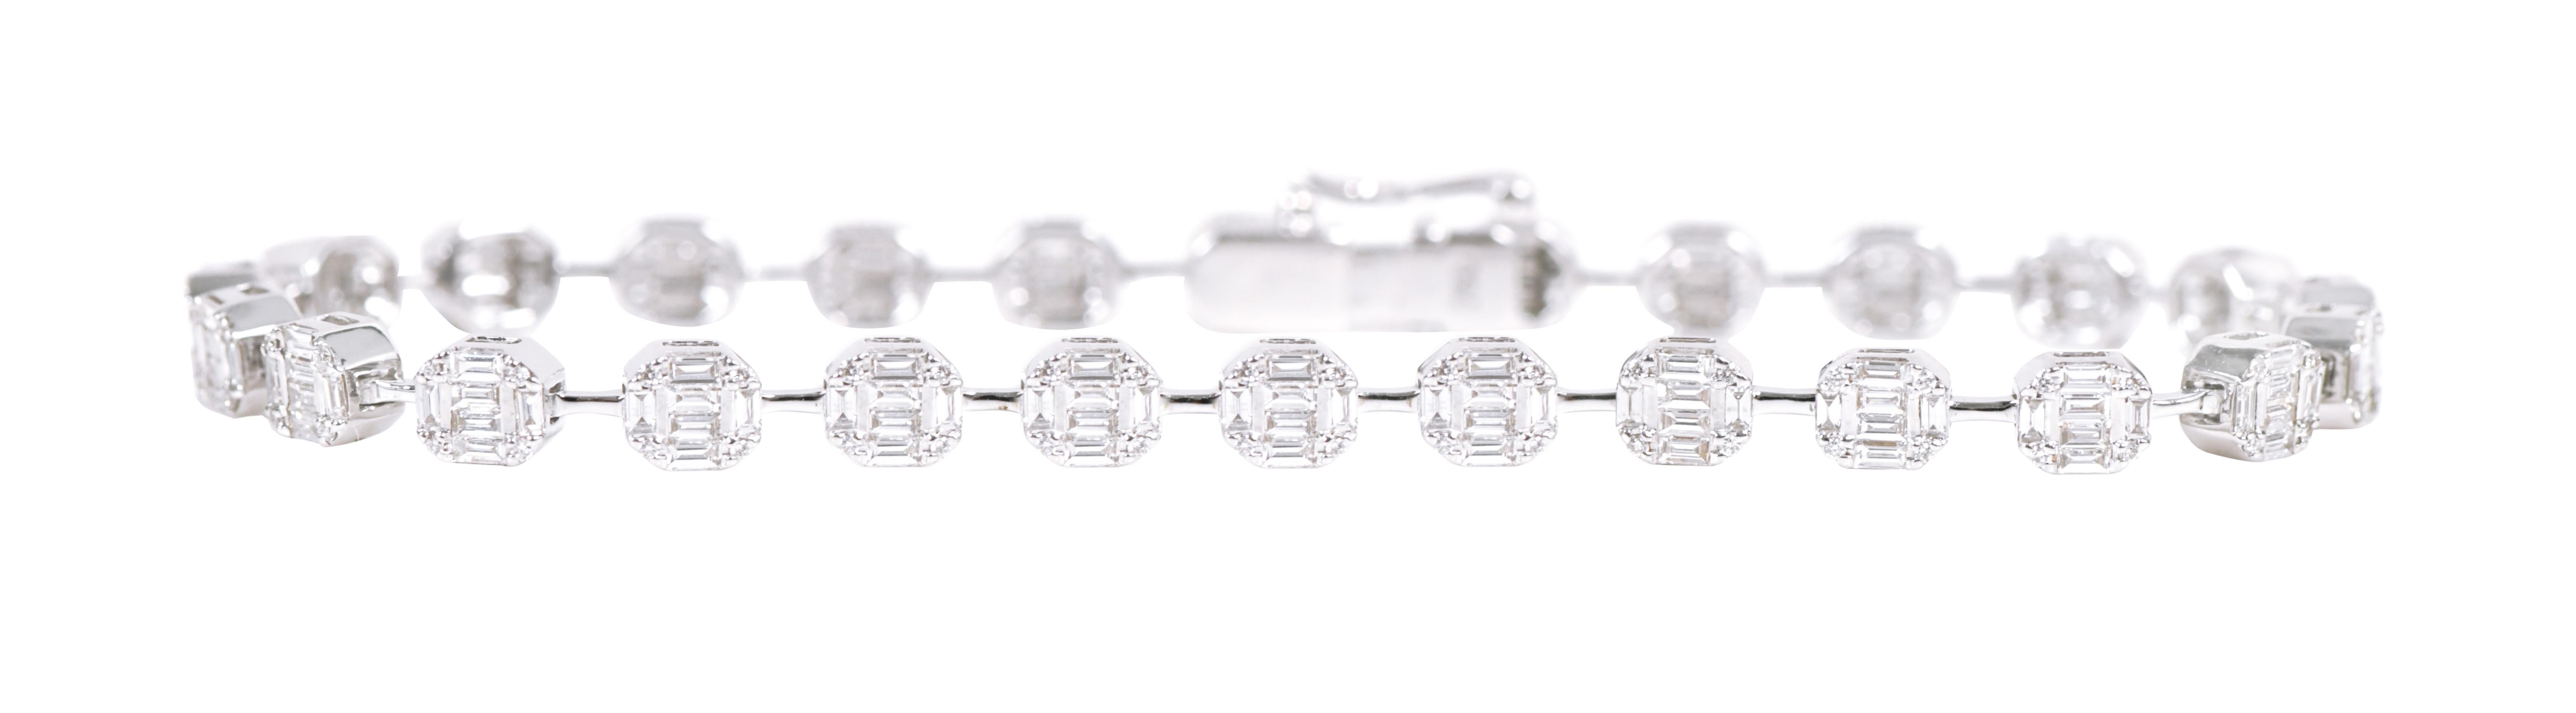 18 Karat White Gold 1.92 Carat “Invisible-Set” Diamond Tennis Bracelet

Versatile, ethereal, and perfectly modern, this radiant design features a unique combination of finely picked diamonds. Set intricately in a simple yet majestic style, the